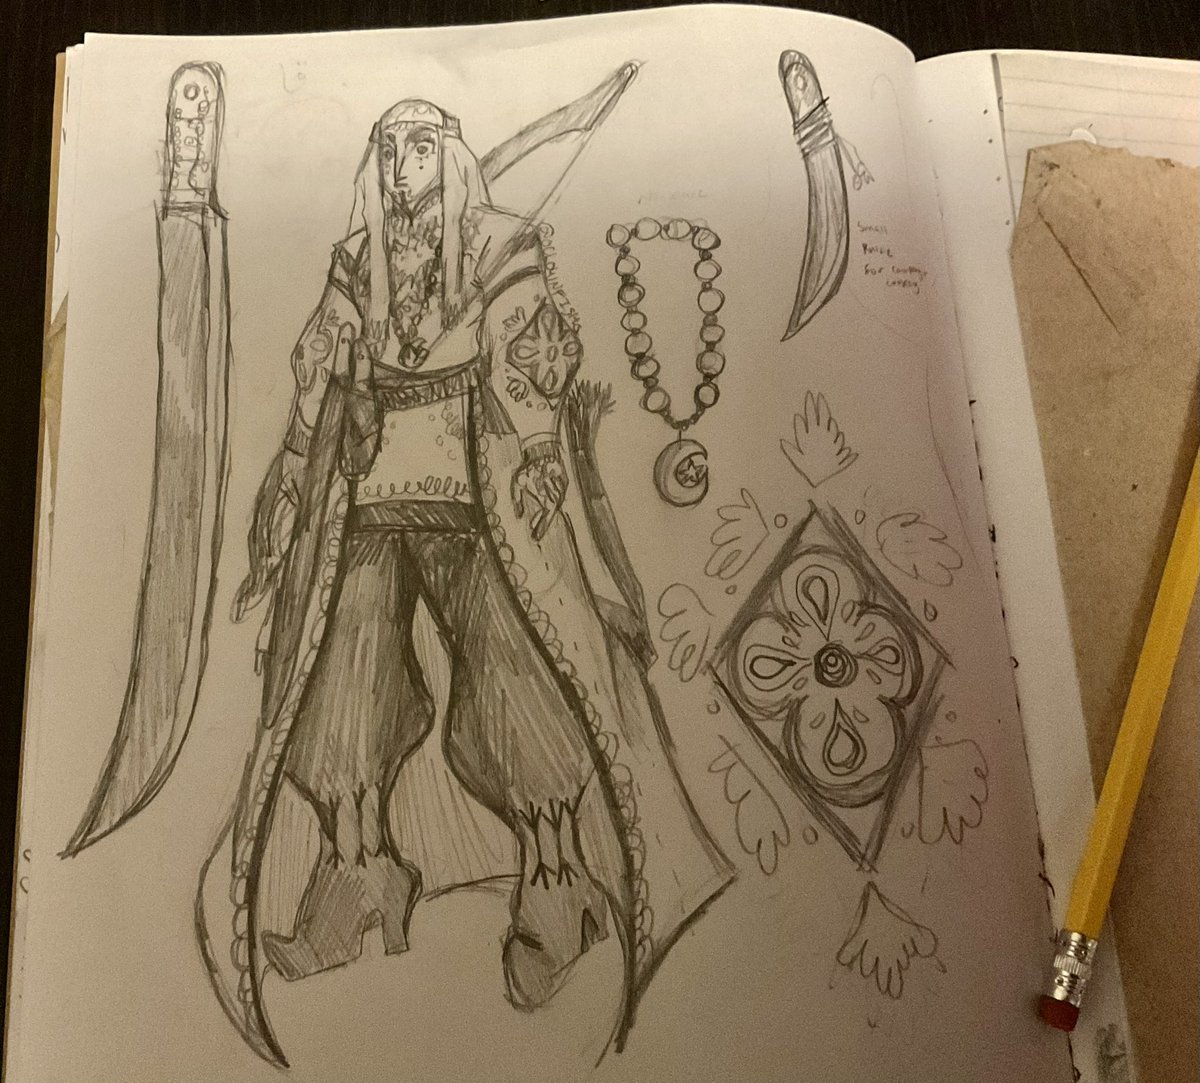 Huge story idea I've had about her being a Bedouin warrior who defends her home land from the invading crusaders along side her Bedouin tribe/family 